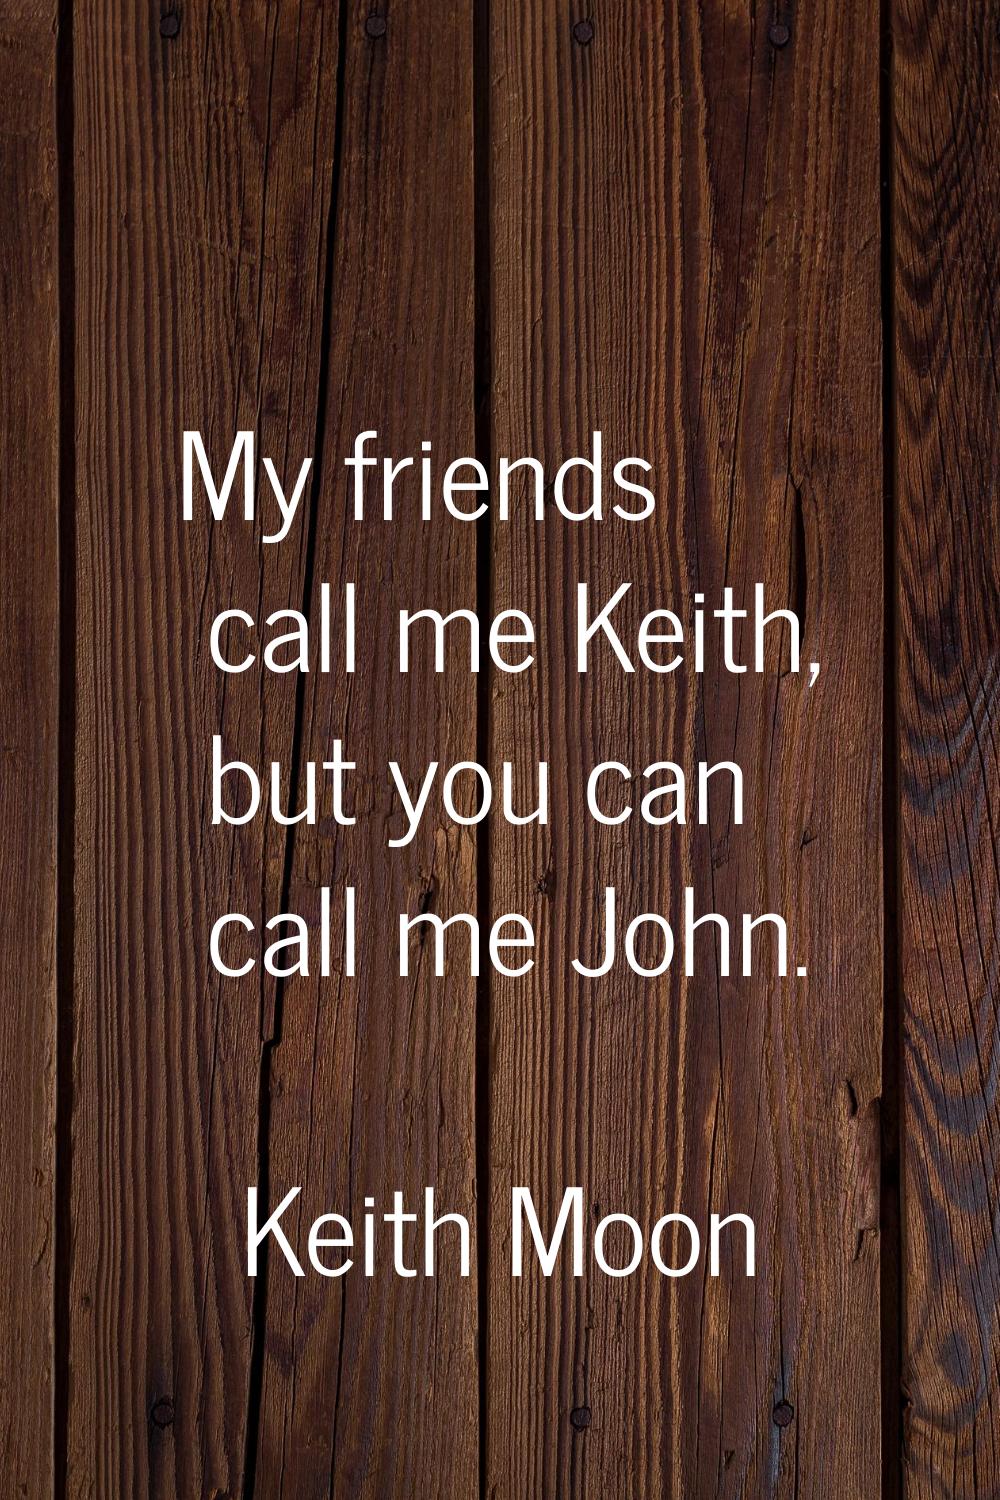 My friends call me Keith, but you can call me John.